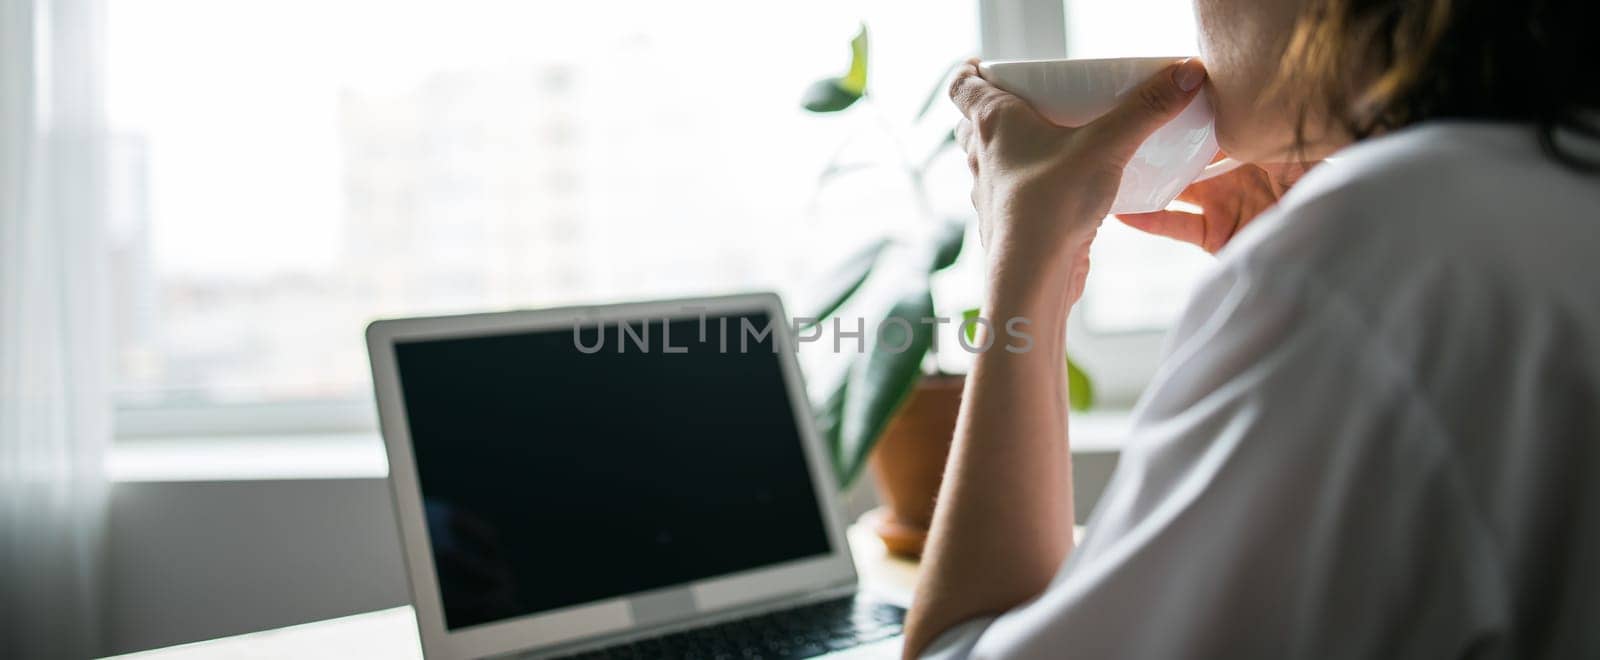 Woman drinks coffee sitting at laptop keyboard on window background. Cup of hot drink in female hand and break during work concept